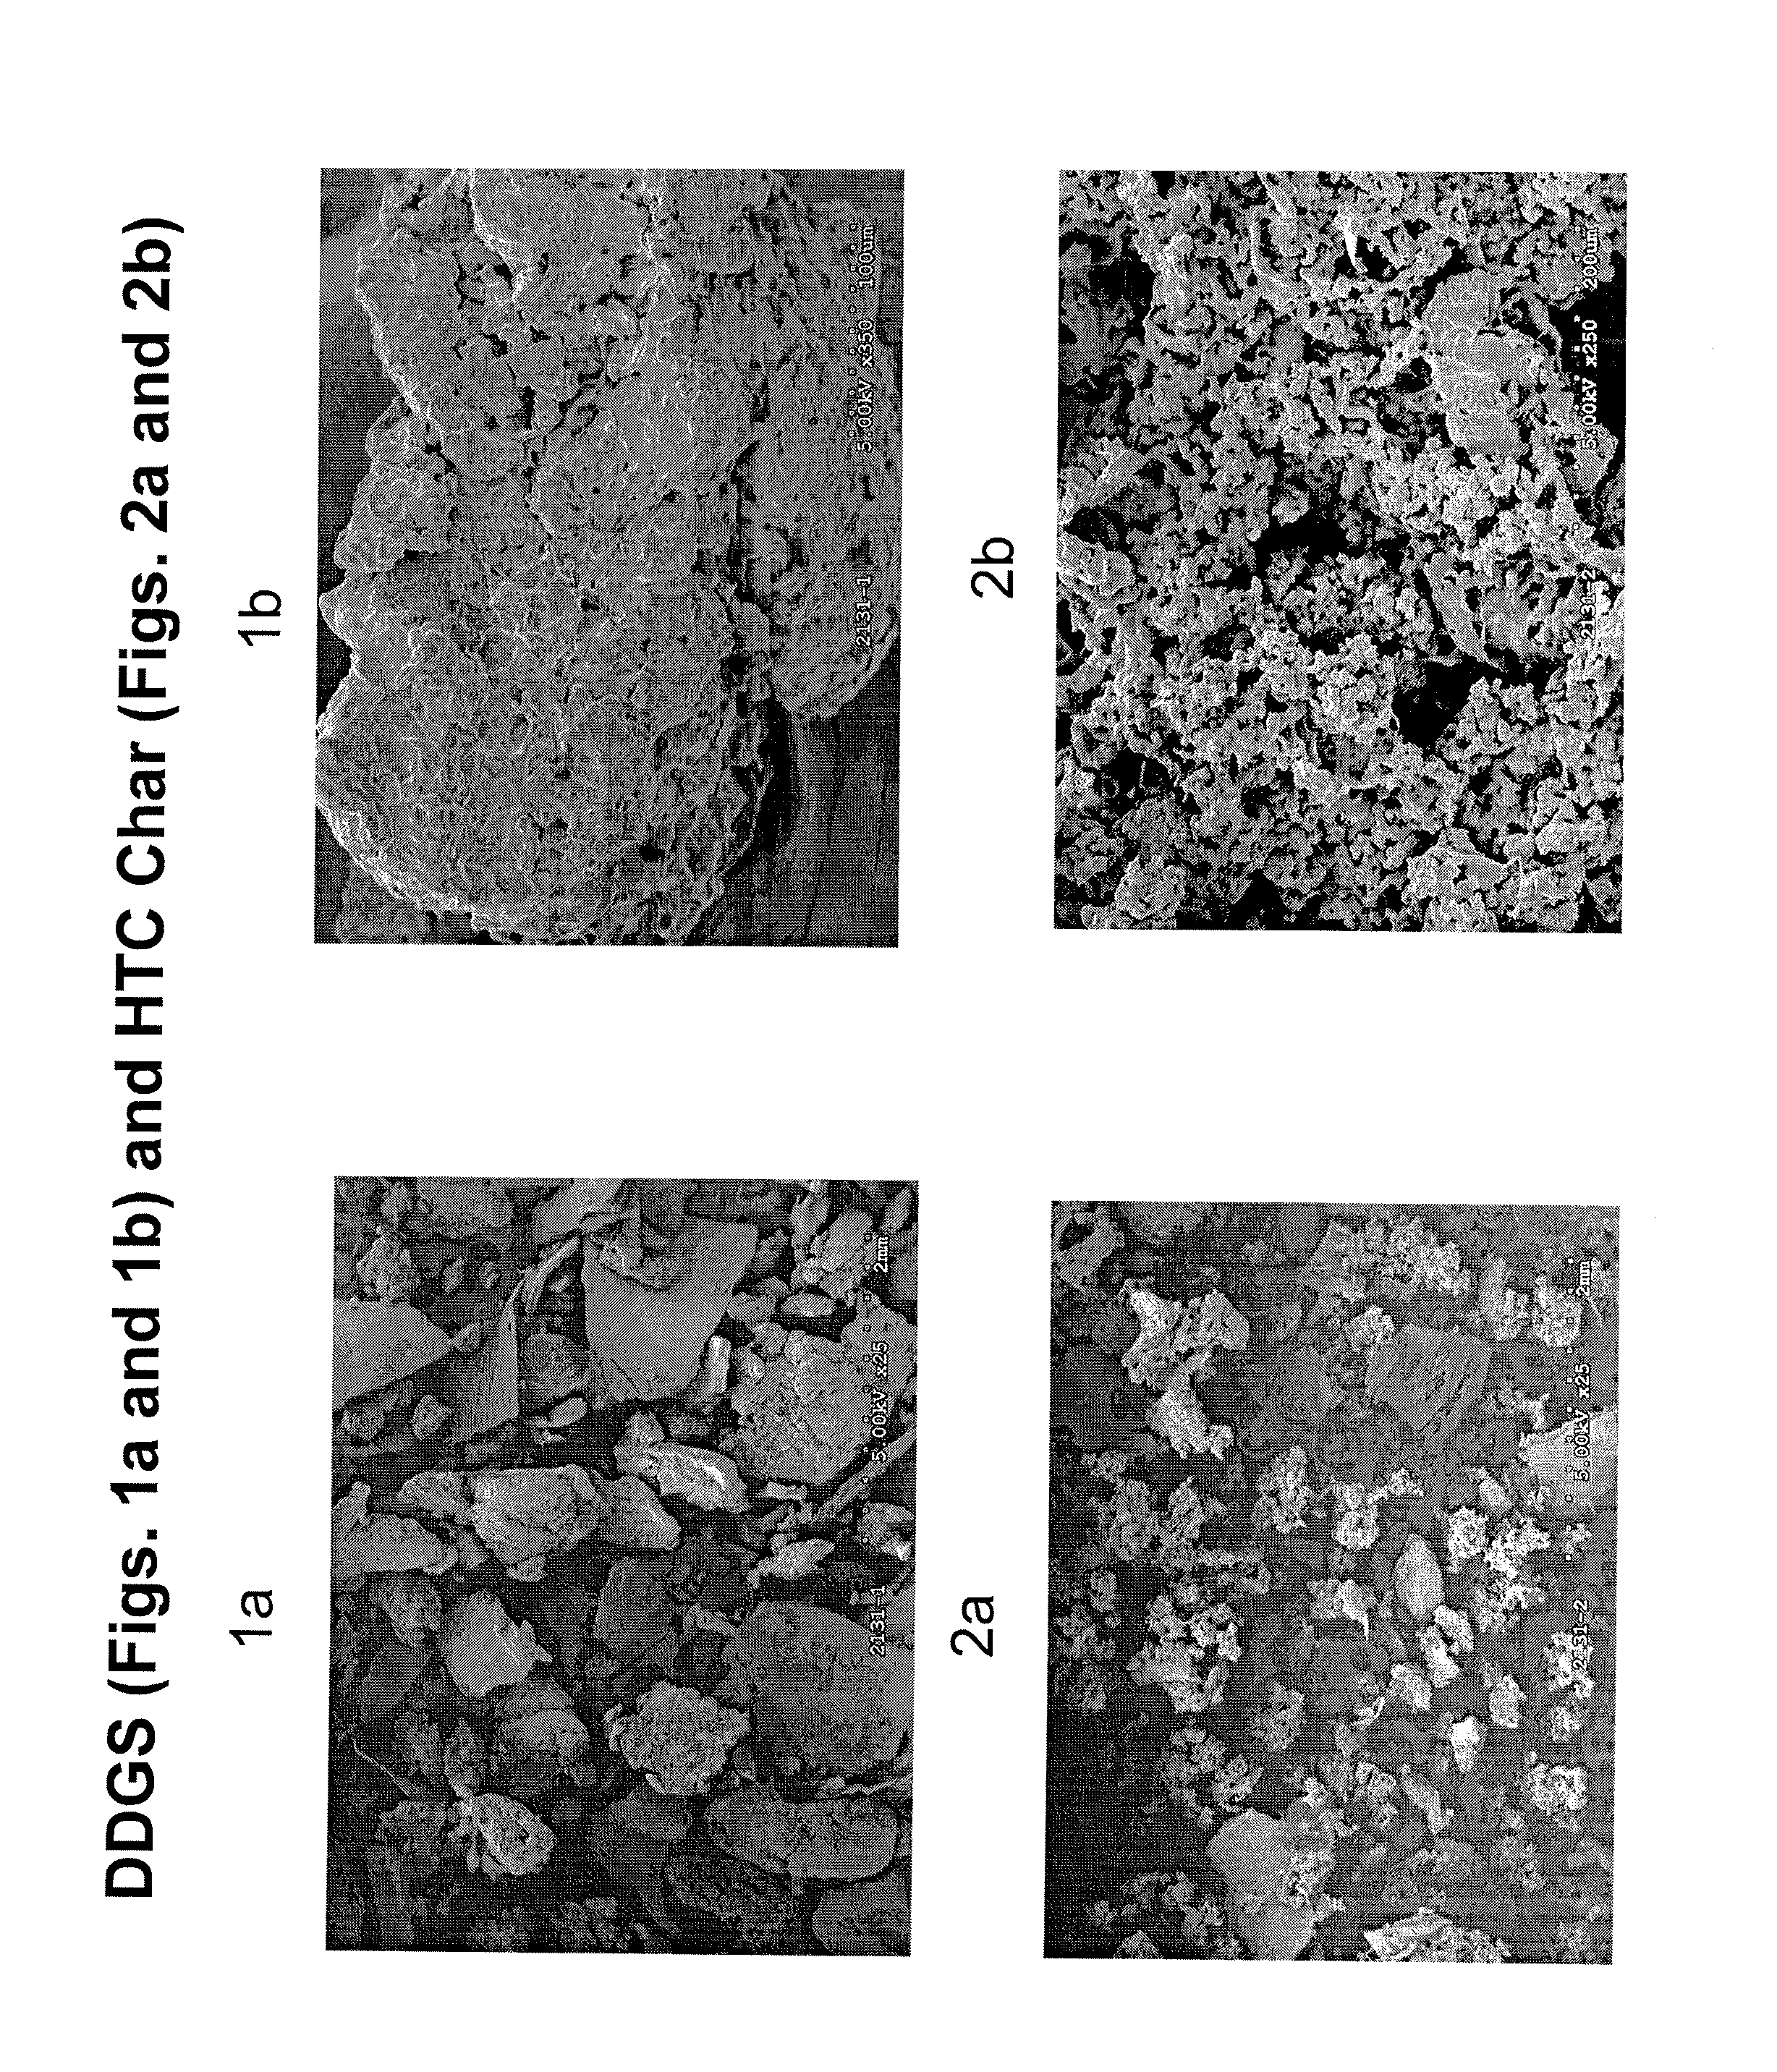 Methods of producing coal and fertilizers from fermentation residues